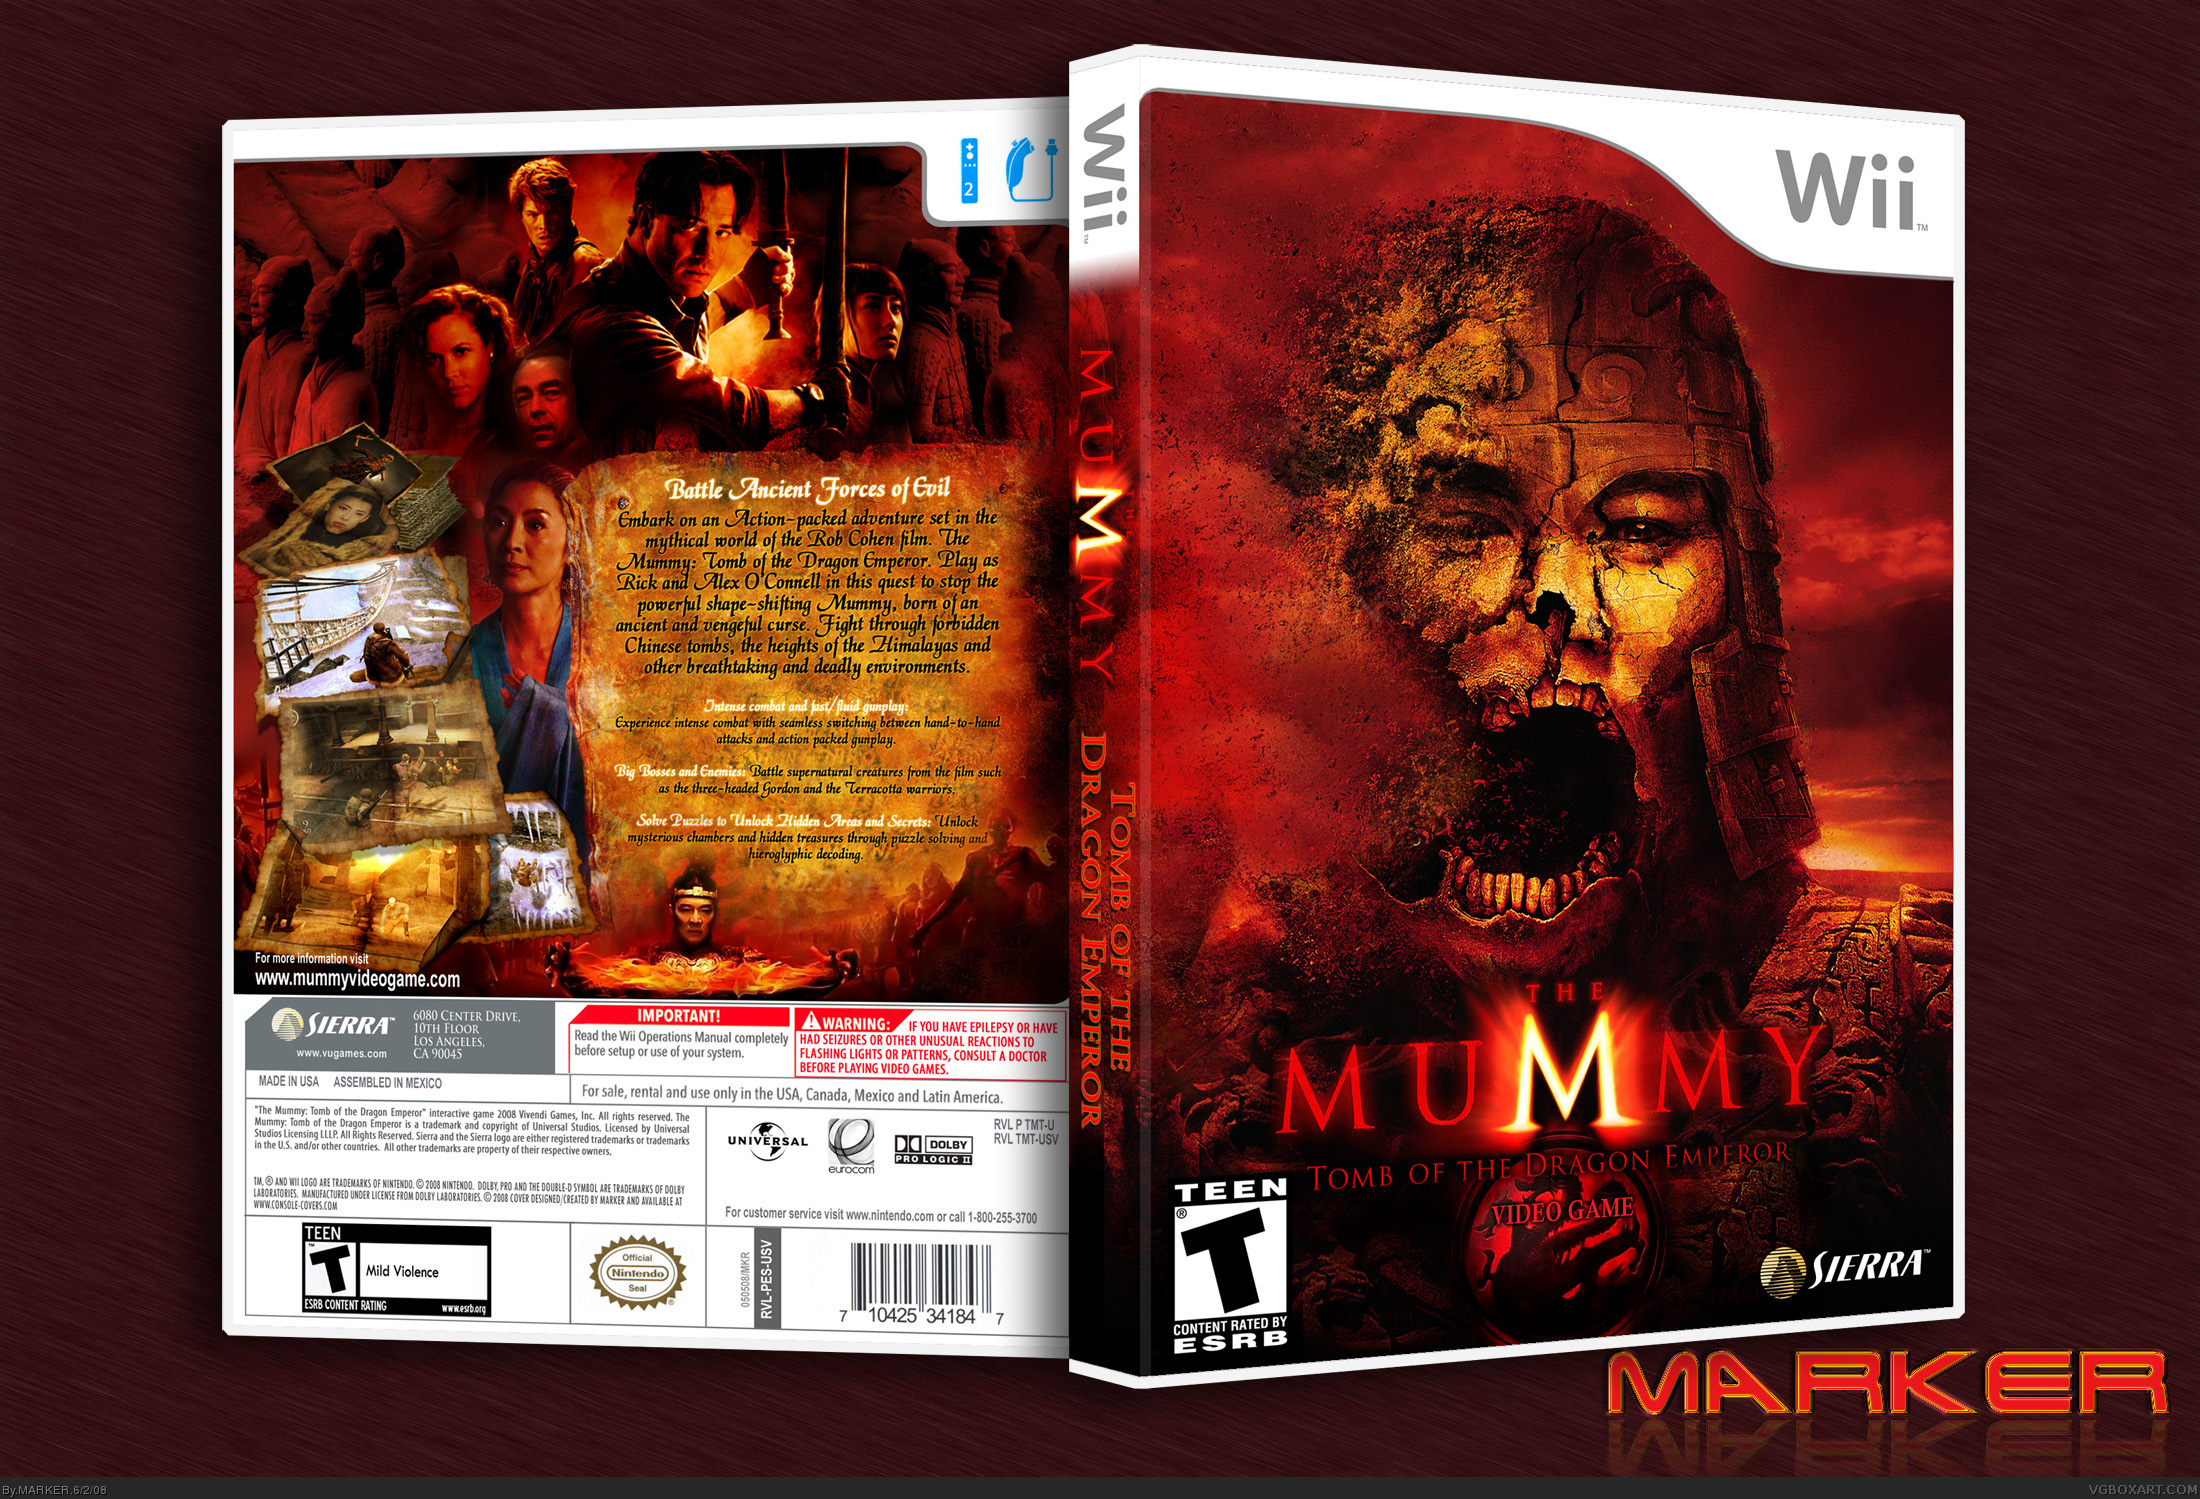 The Mummy Tomb of the Dragon Emperor box cover